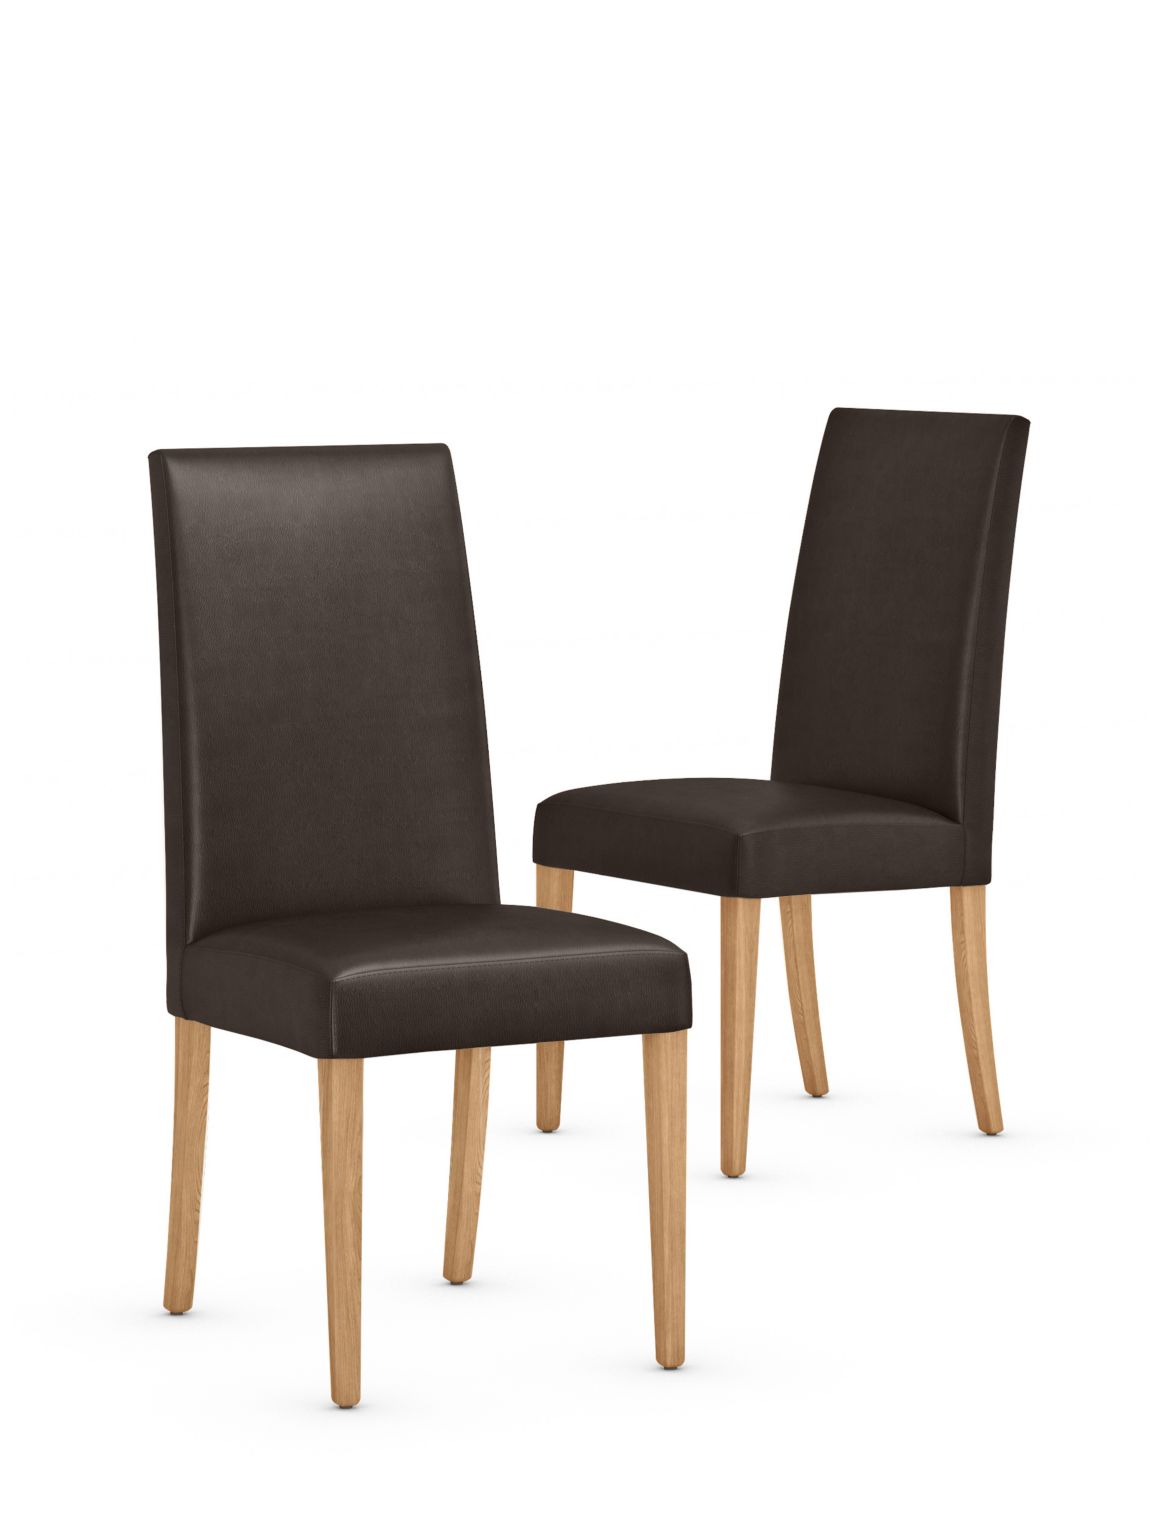 Set of 2 Alton Dining Chairs brown